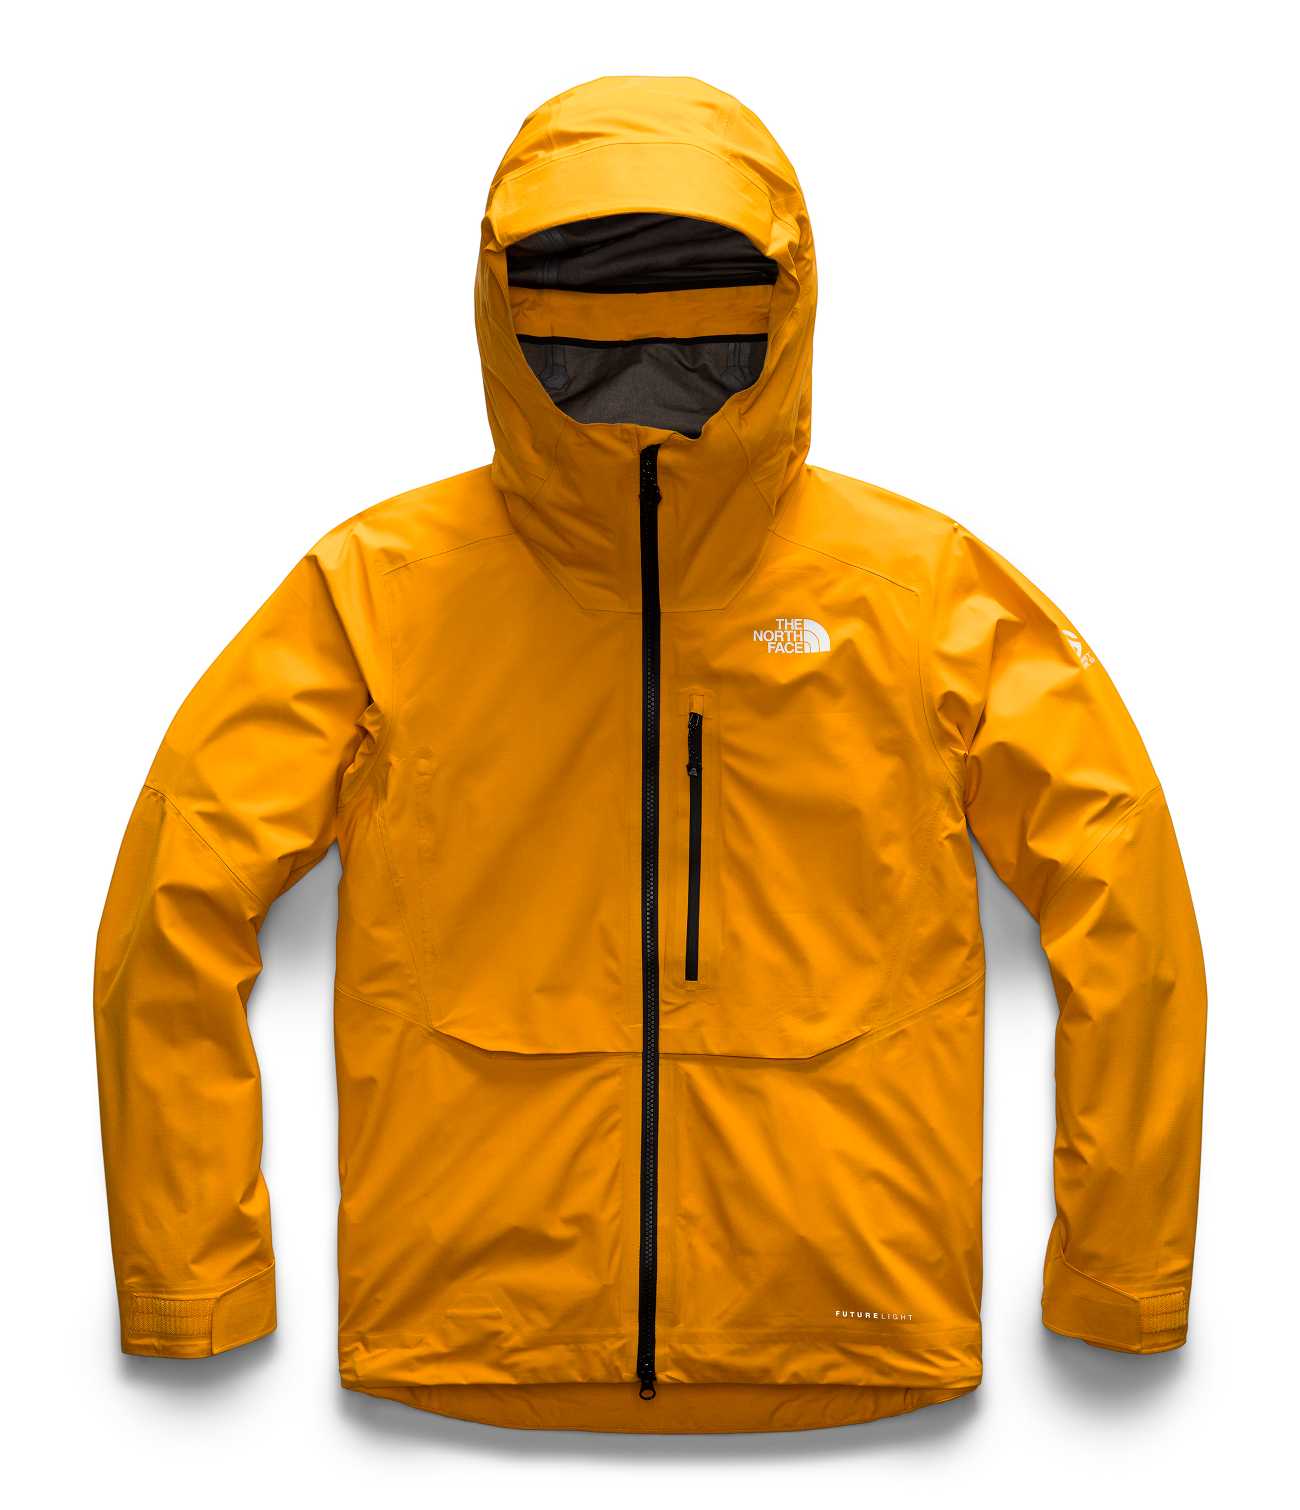 WOMEN'S SUMMIT L5 LIGHTWEIGHT JACKET | The North Face | The North 